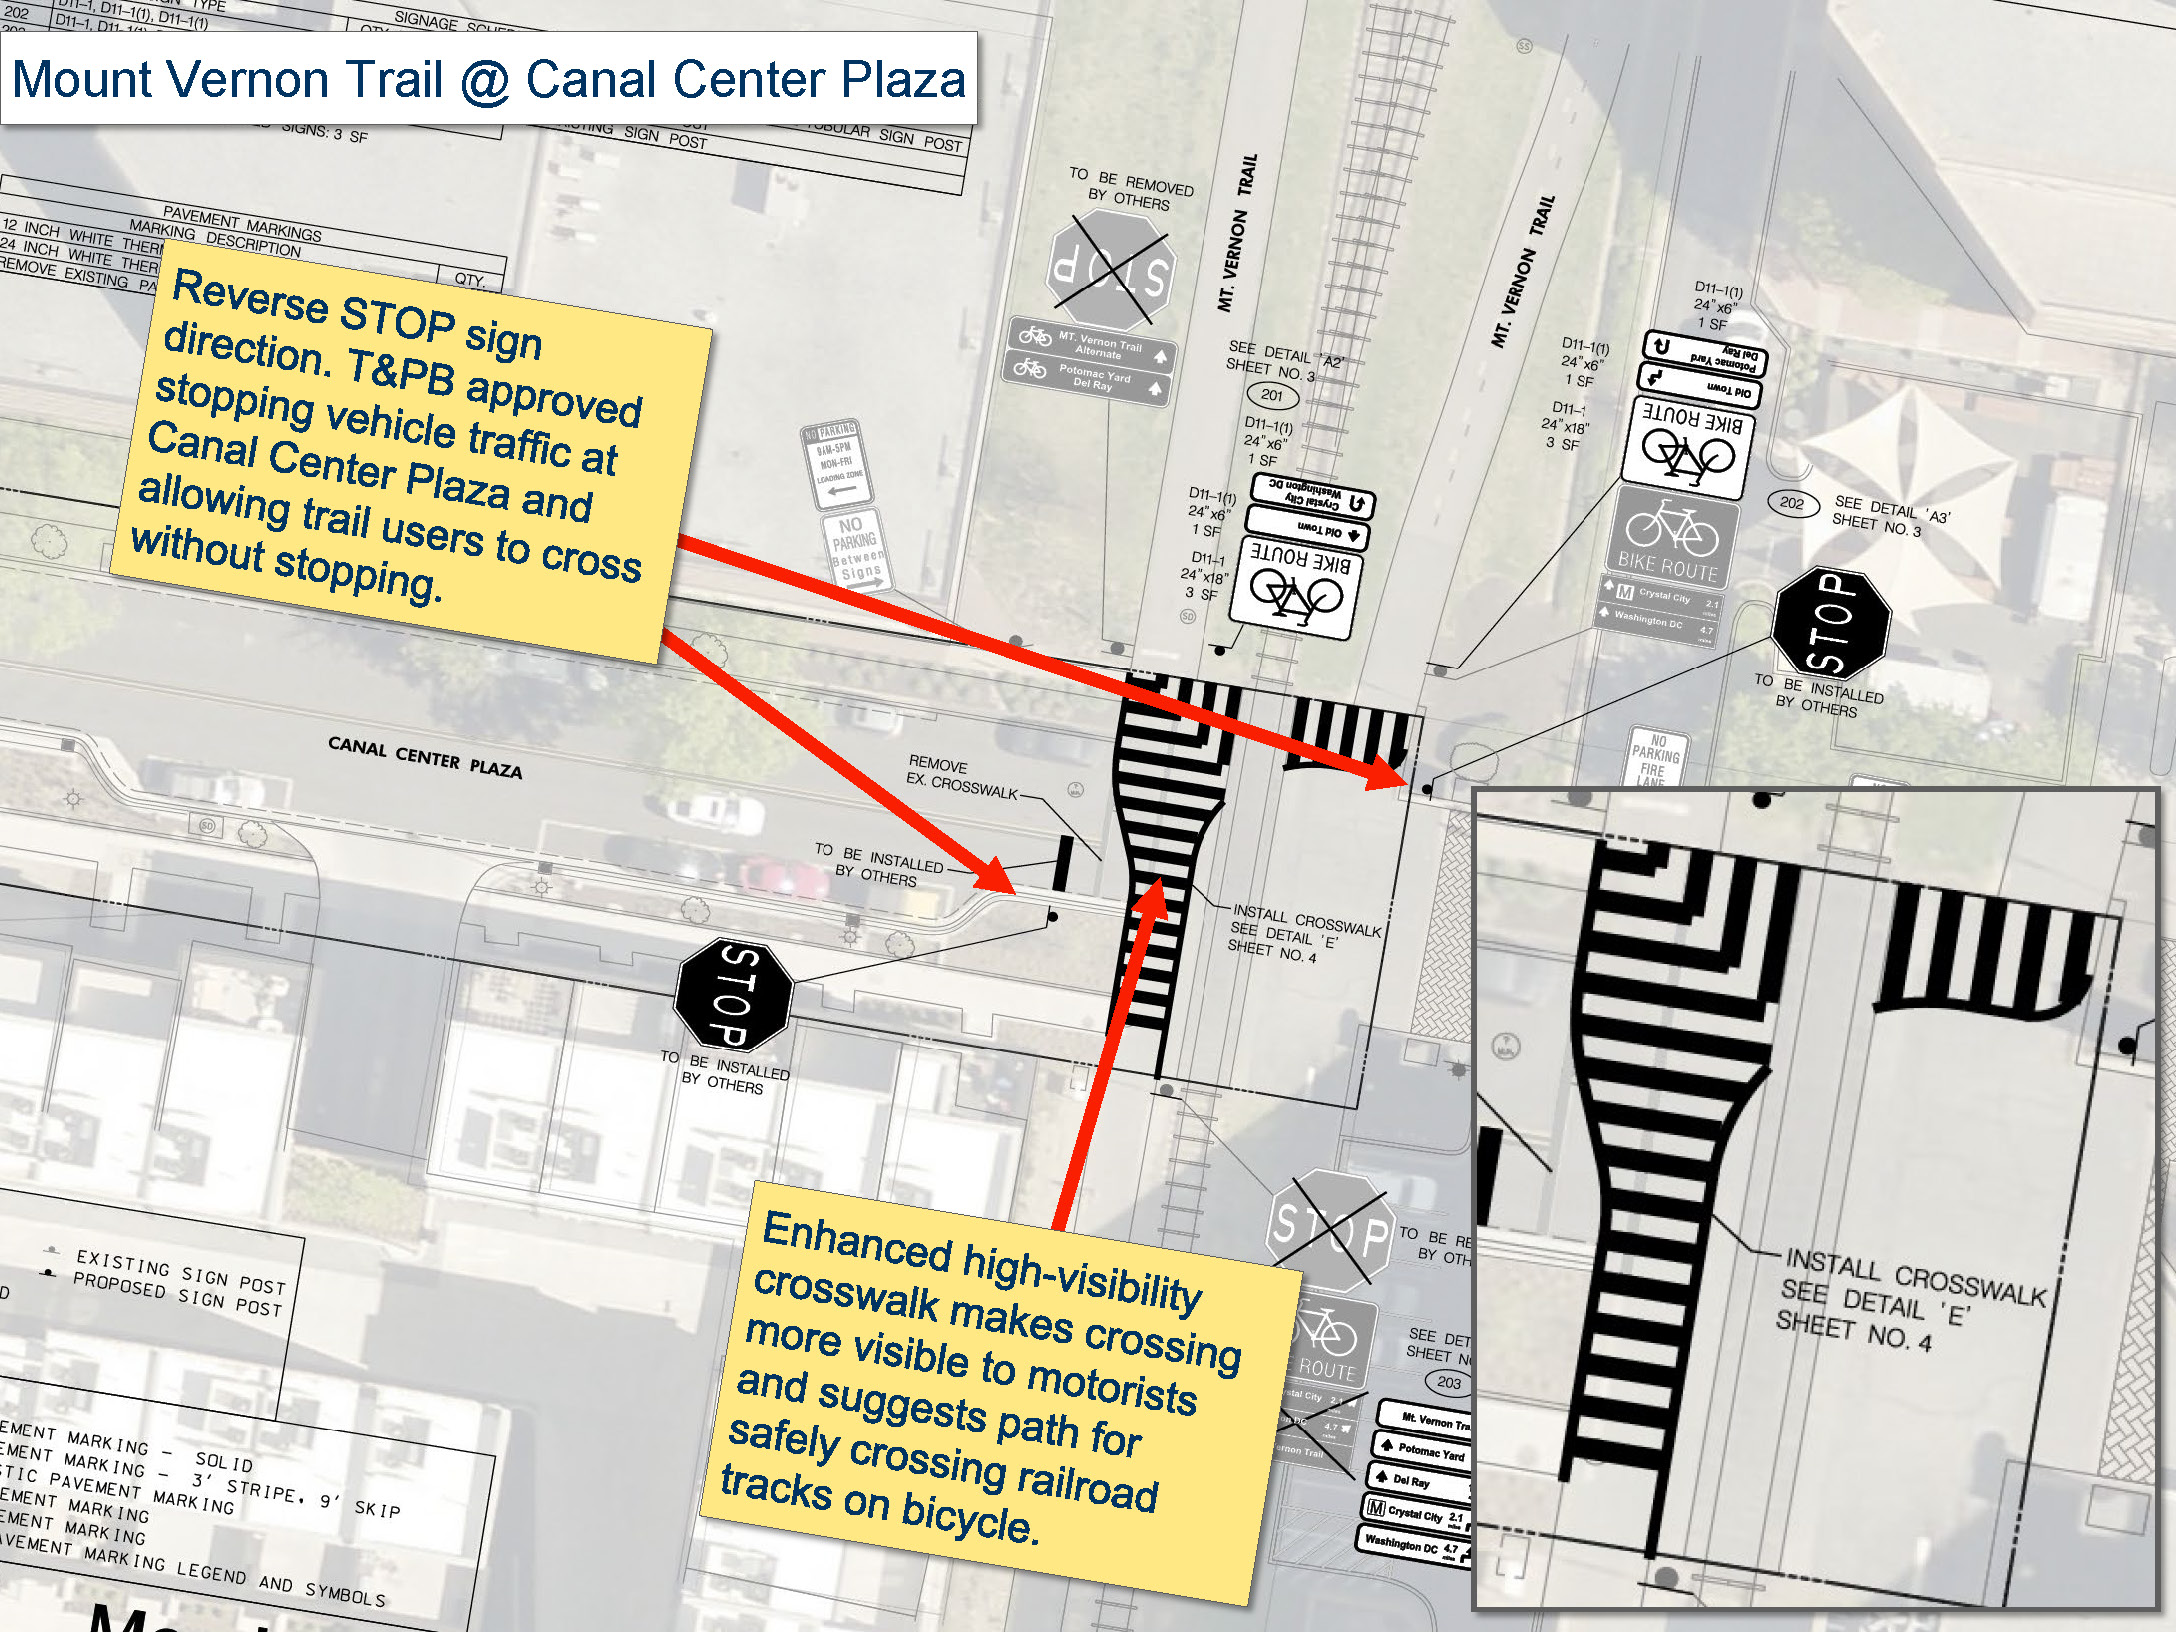 This images shows Mount Vernon Trail improvements at Canal Center Plaza